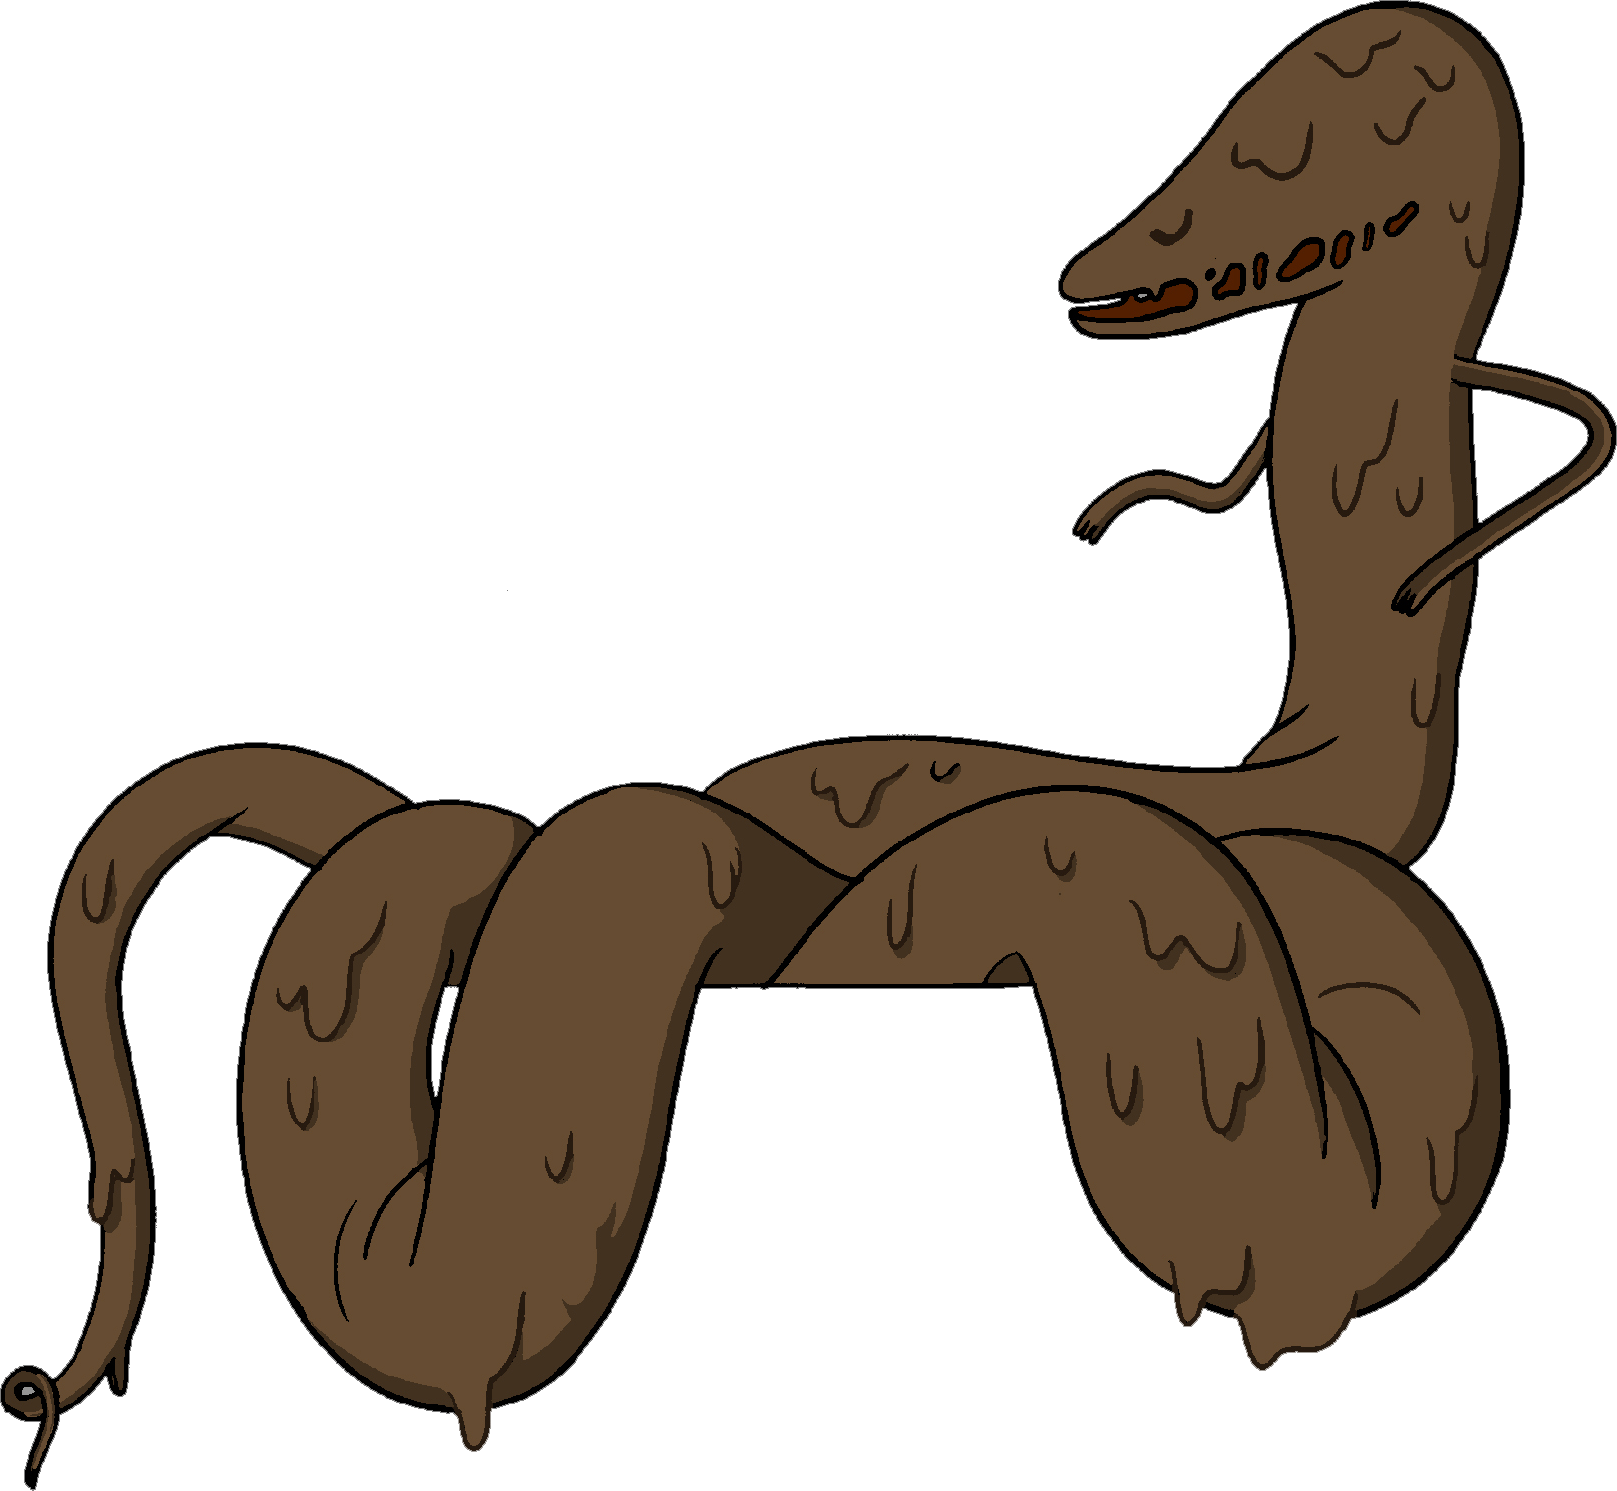 Aquandrius adventure time wiki. Clipart snake brown snake